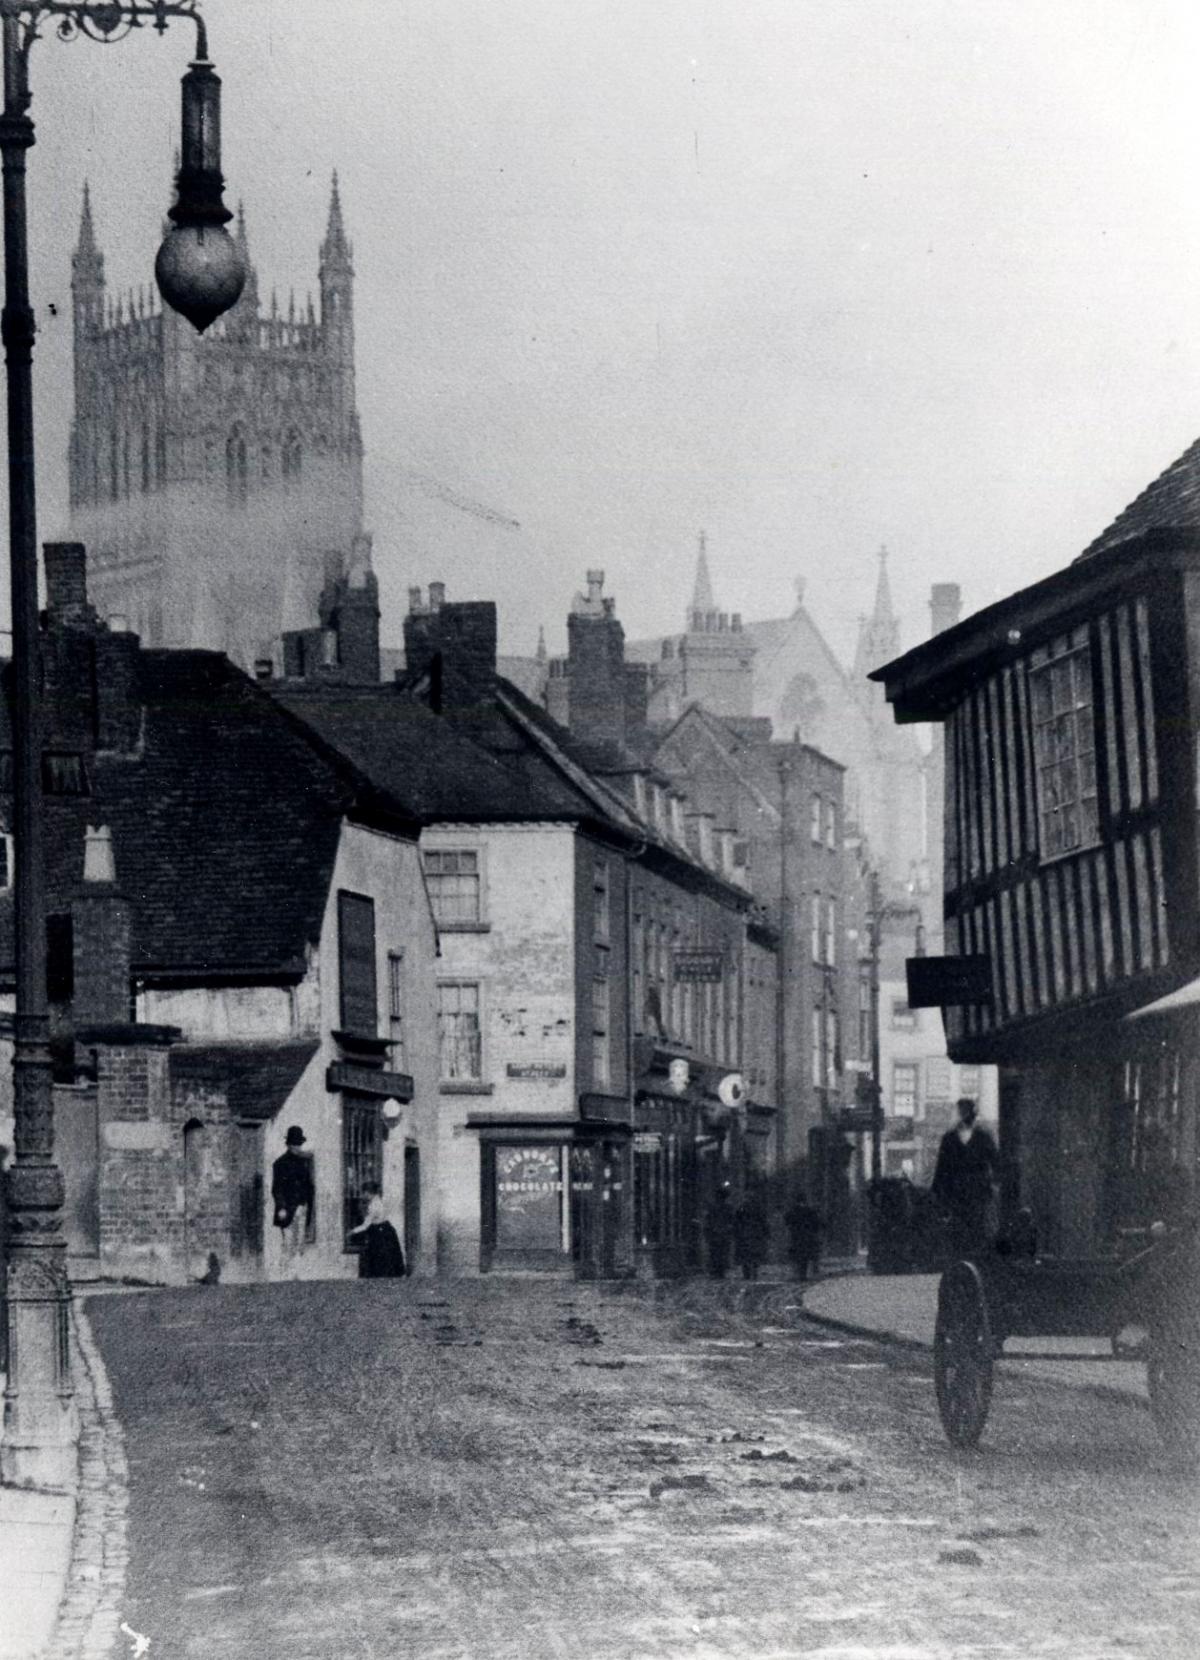 Vanished Worcester. Gas-lit Sidbury, Worcester, in Victorian times. The buildings on the left lined the eventually doomed south side of the street